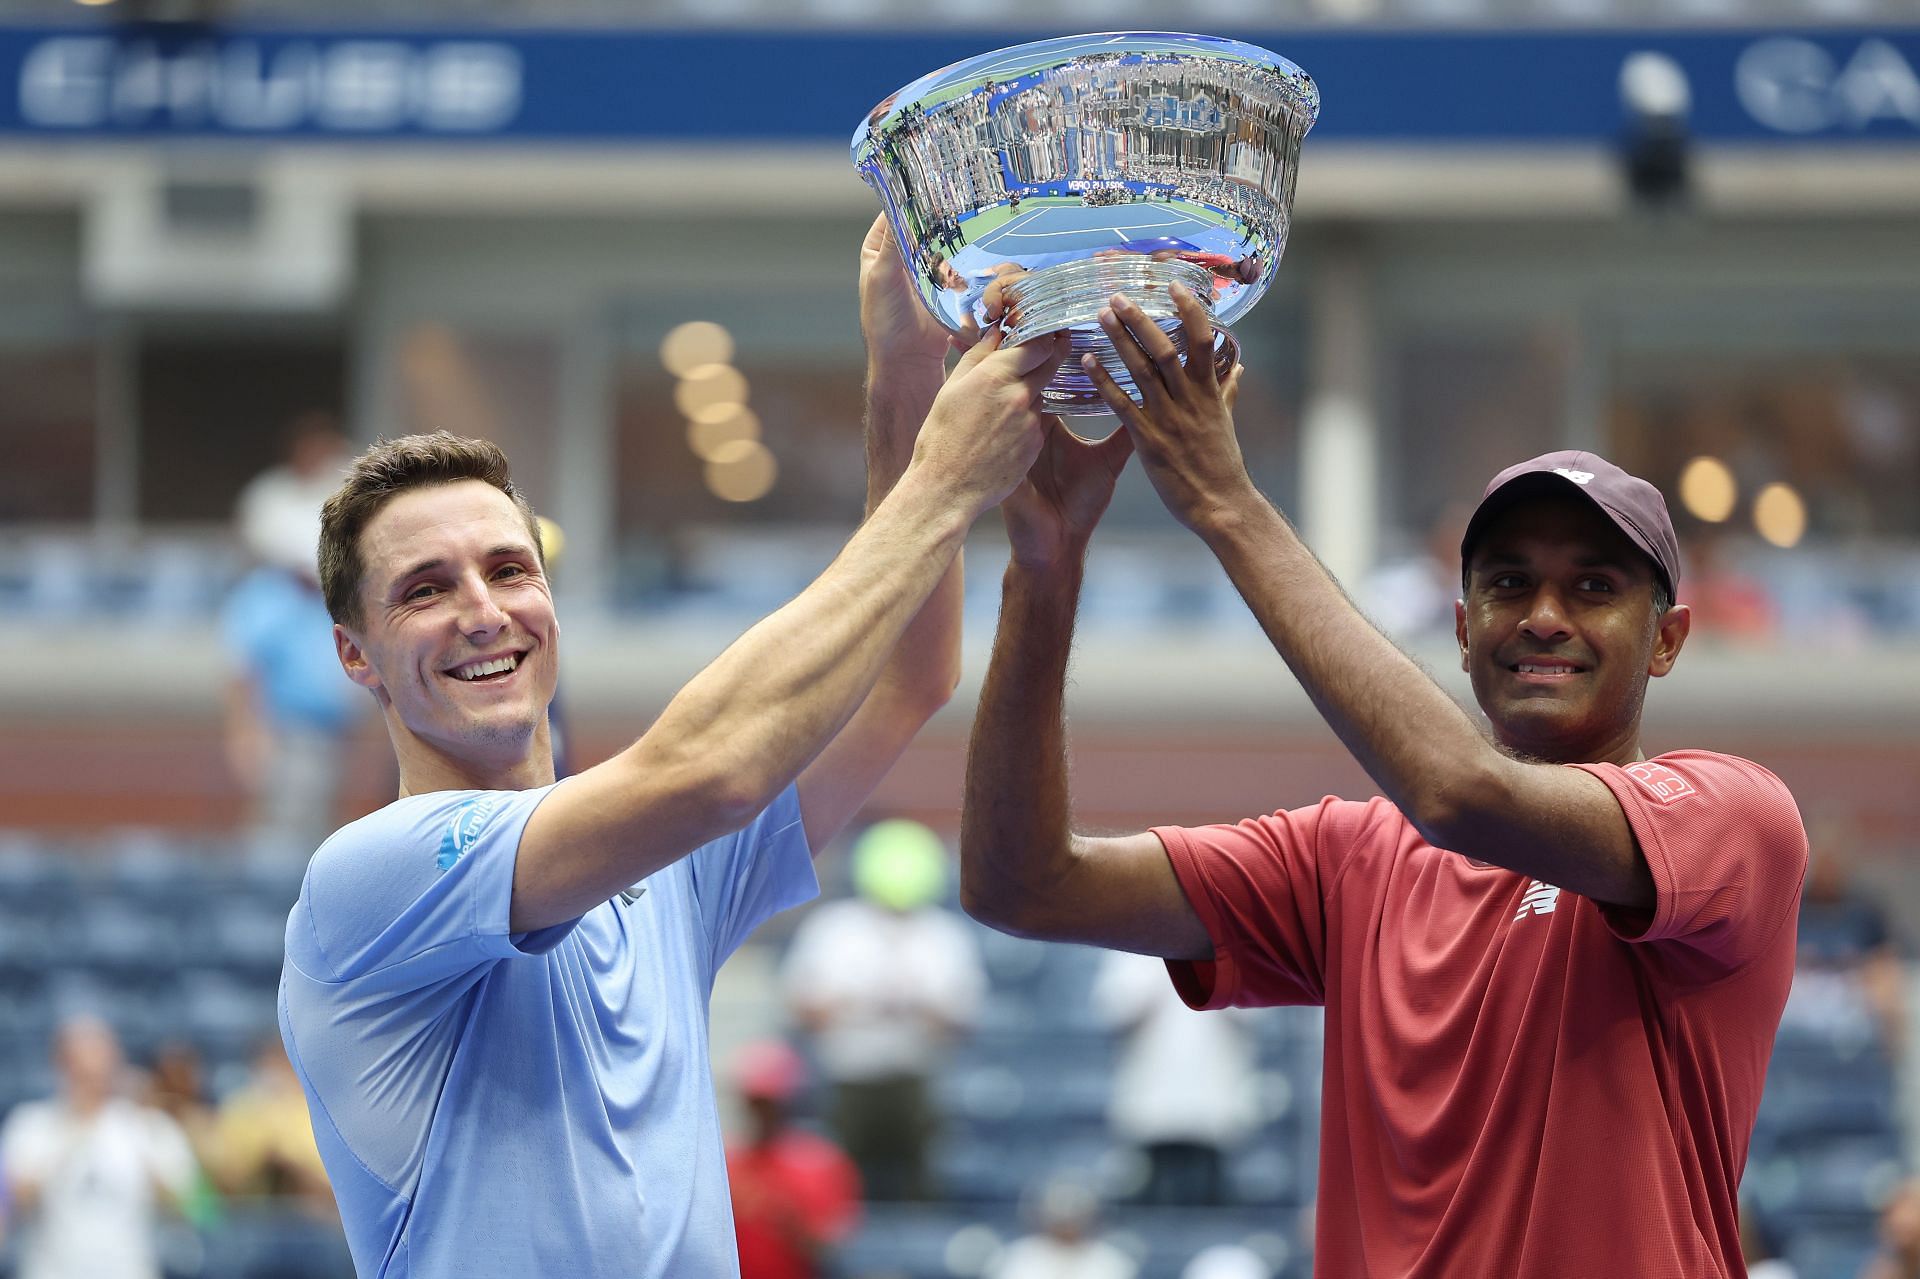 ATP players and tournaments to share profits from 2023 - SportsPro